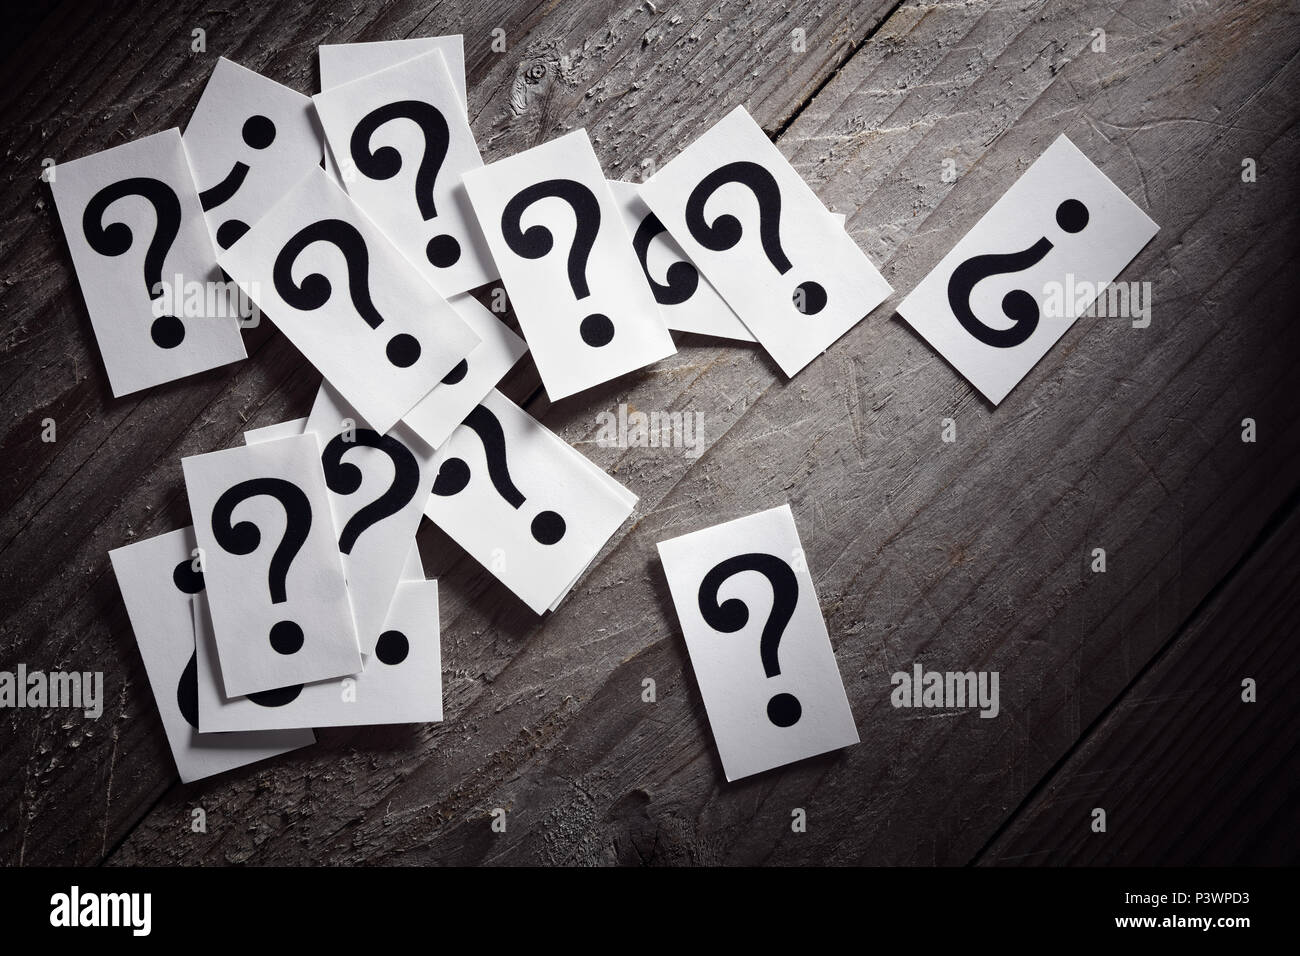 Question mark heap on table concept for confusion, question or solution Stock Photo